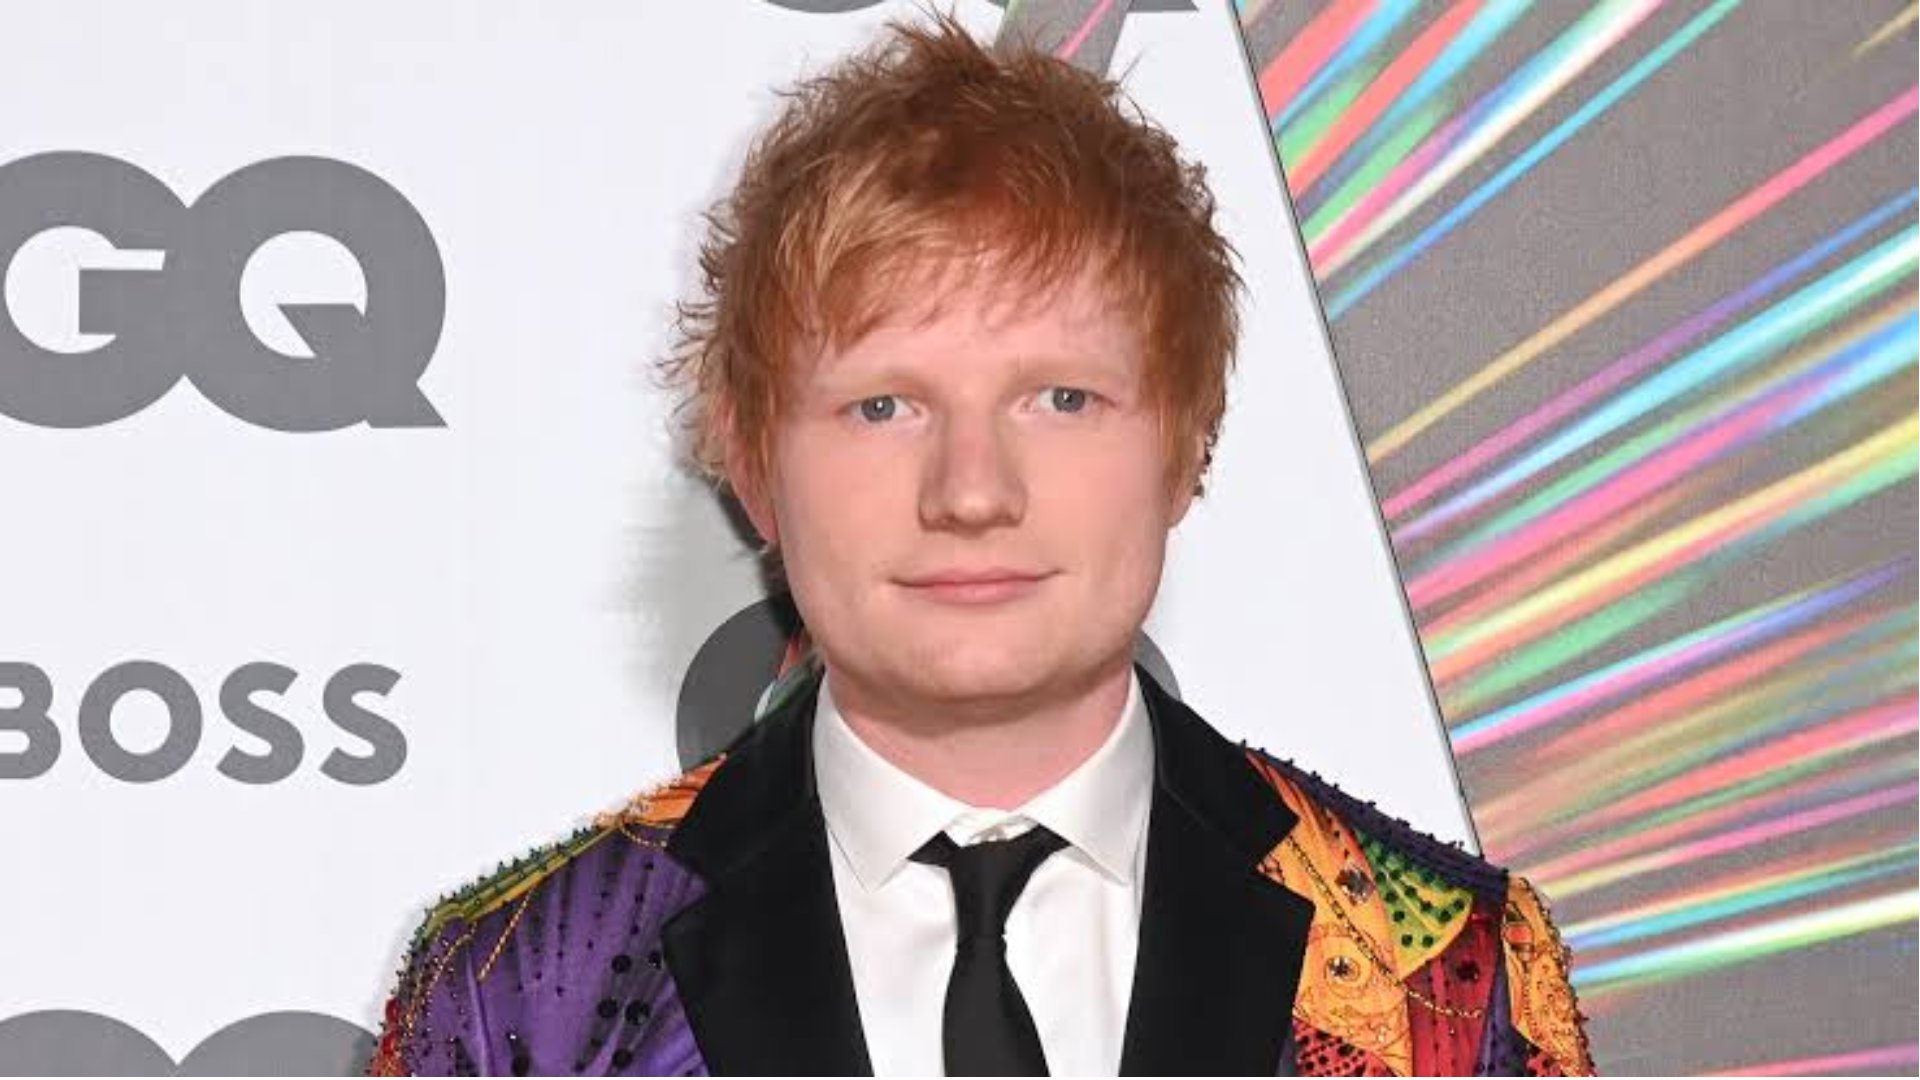 Jury selection to begin in copyright infringement lawsuit over Ed Sheeran's "Thinking Out Loud"